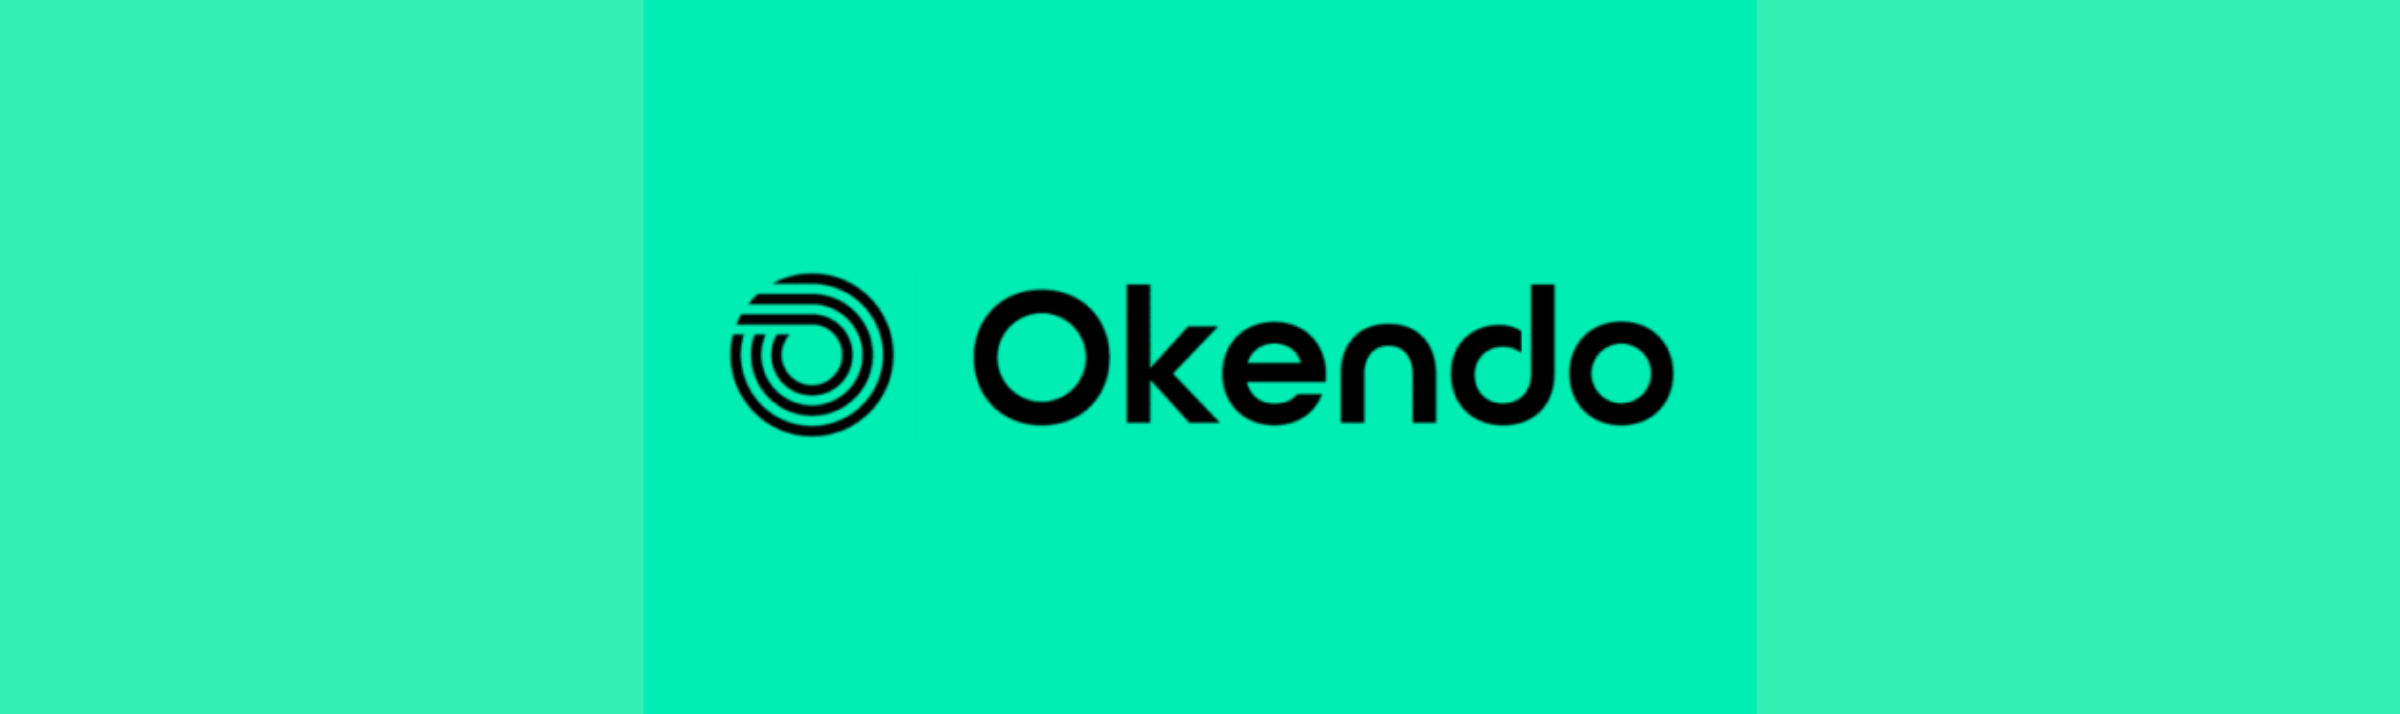 Okendo Uses Charm's Intuitive Ecommerce Platform To Enrich Lead Data